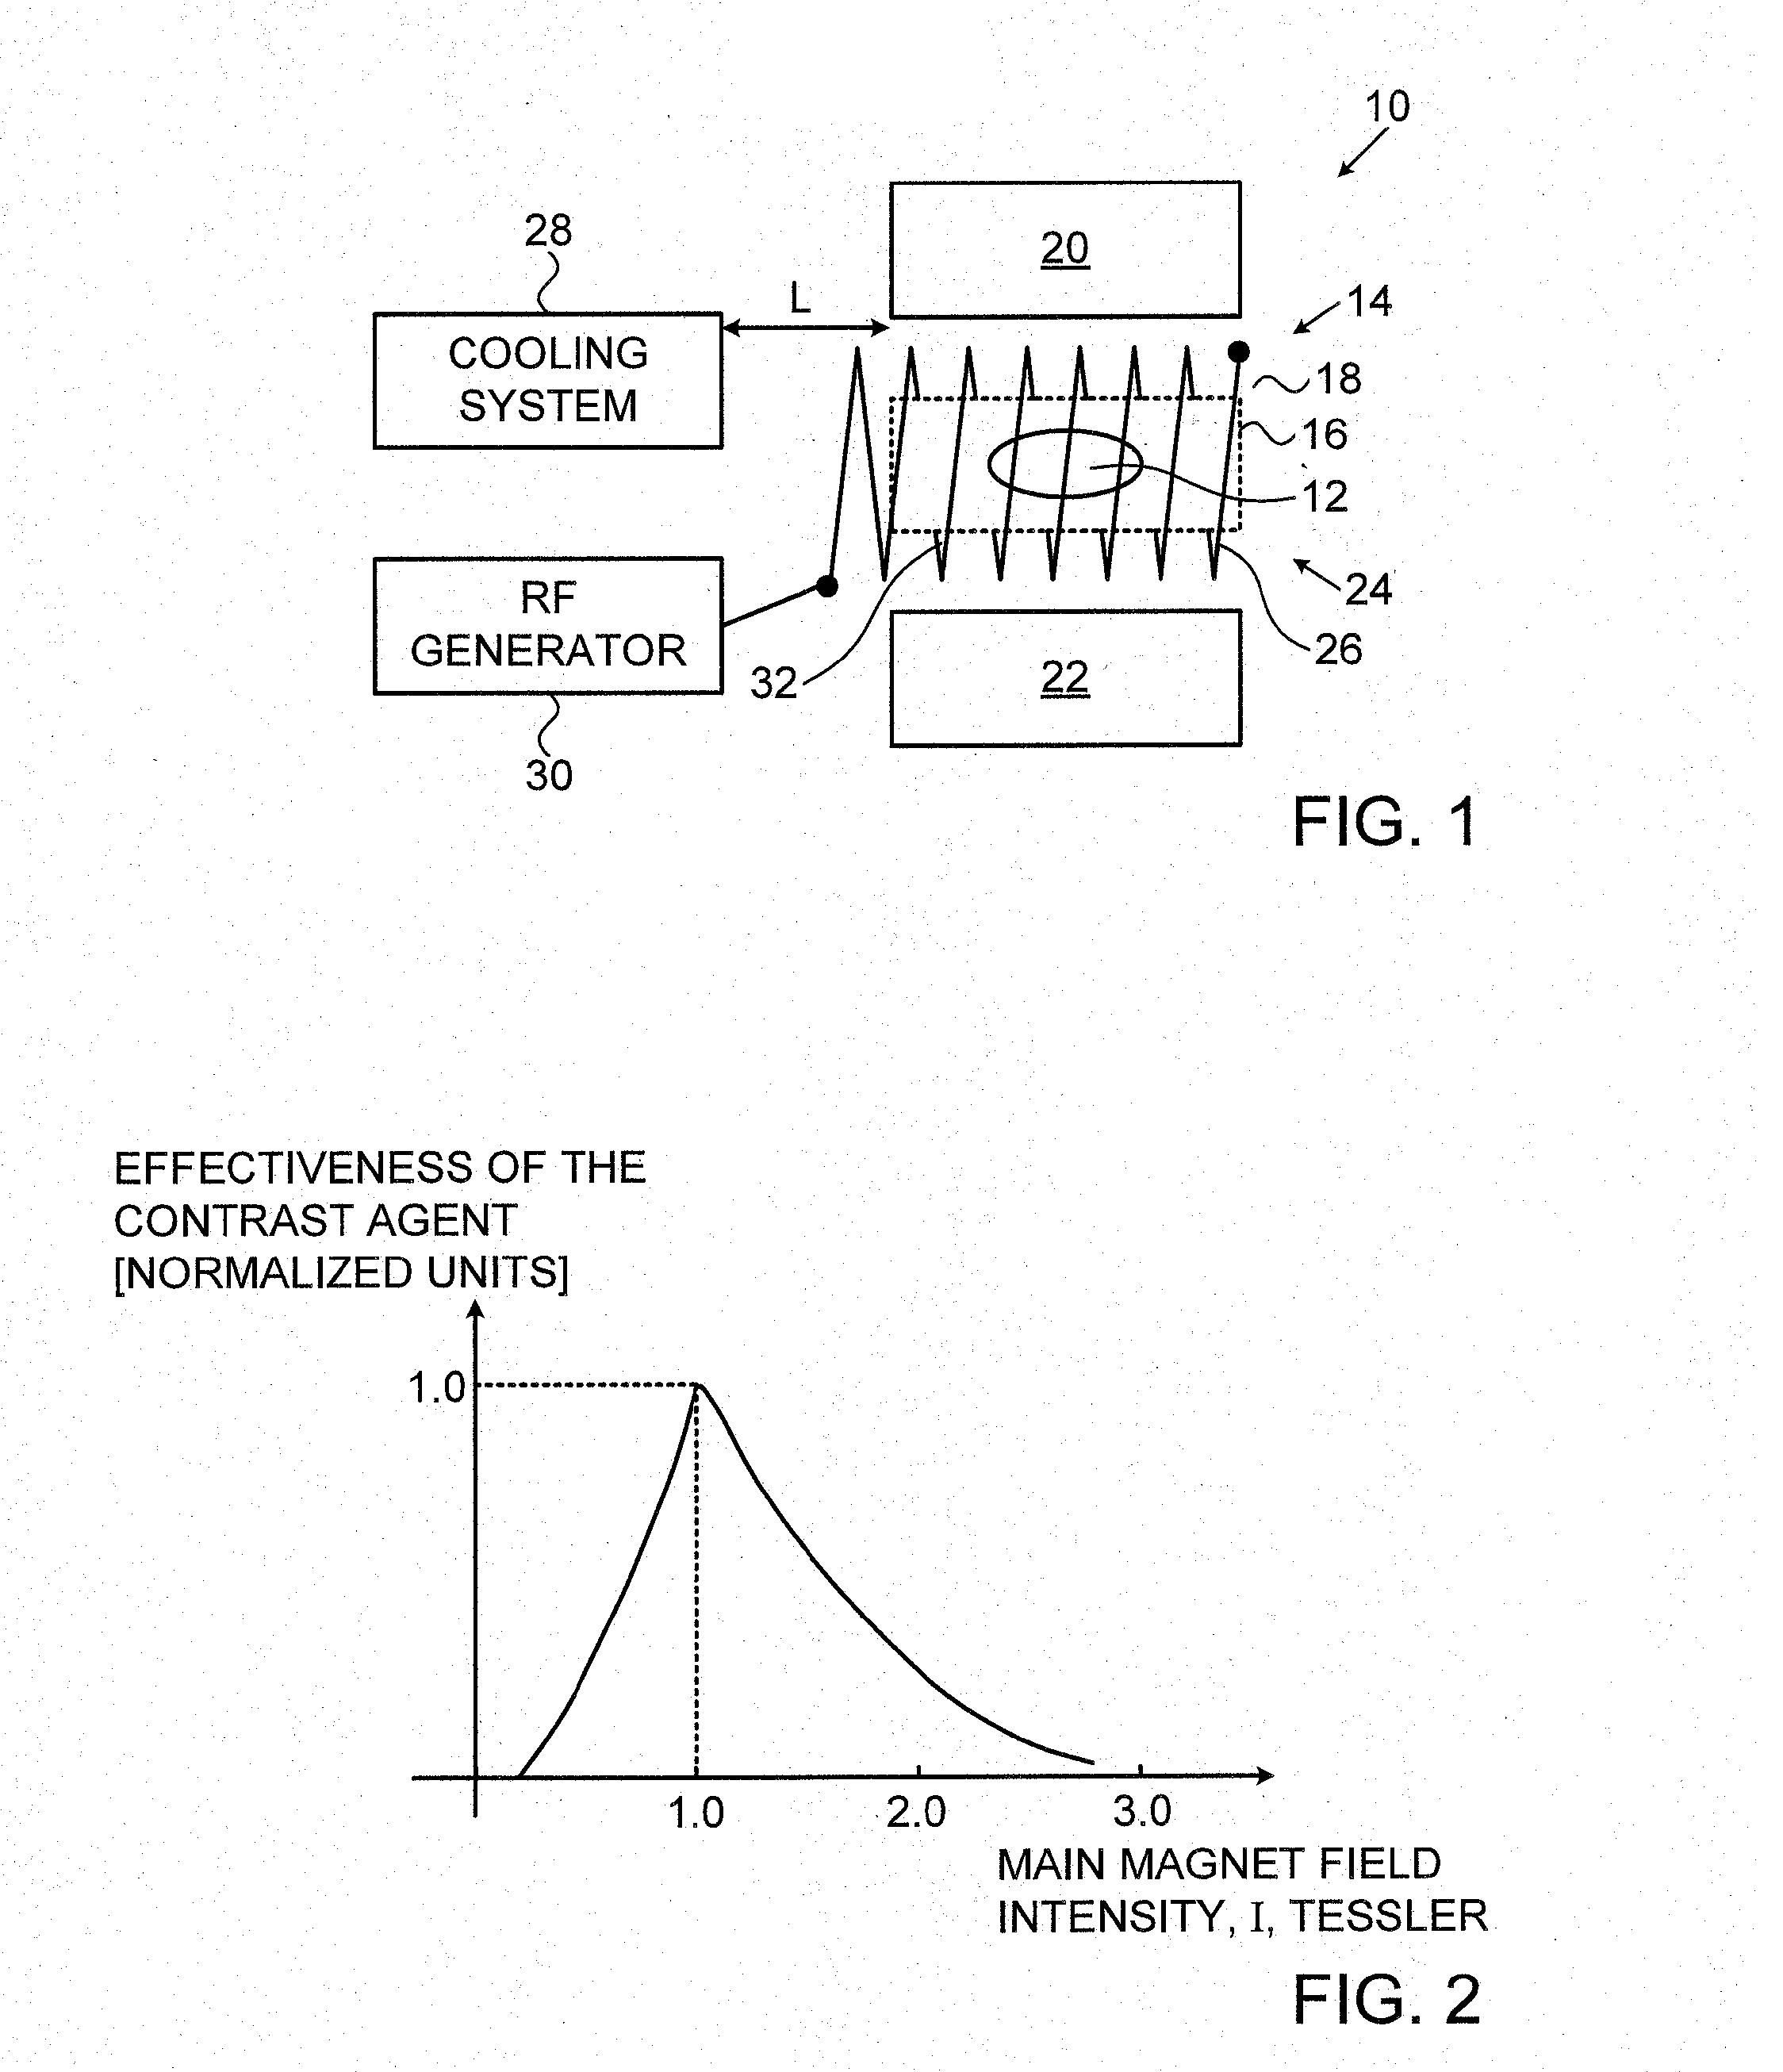 Low-field magnetic resonance system (lf-mrs) for producing an MRI image